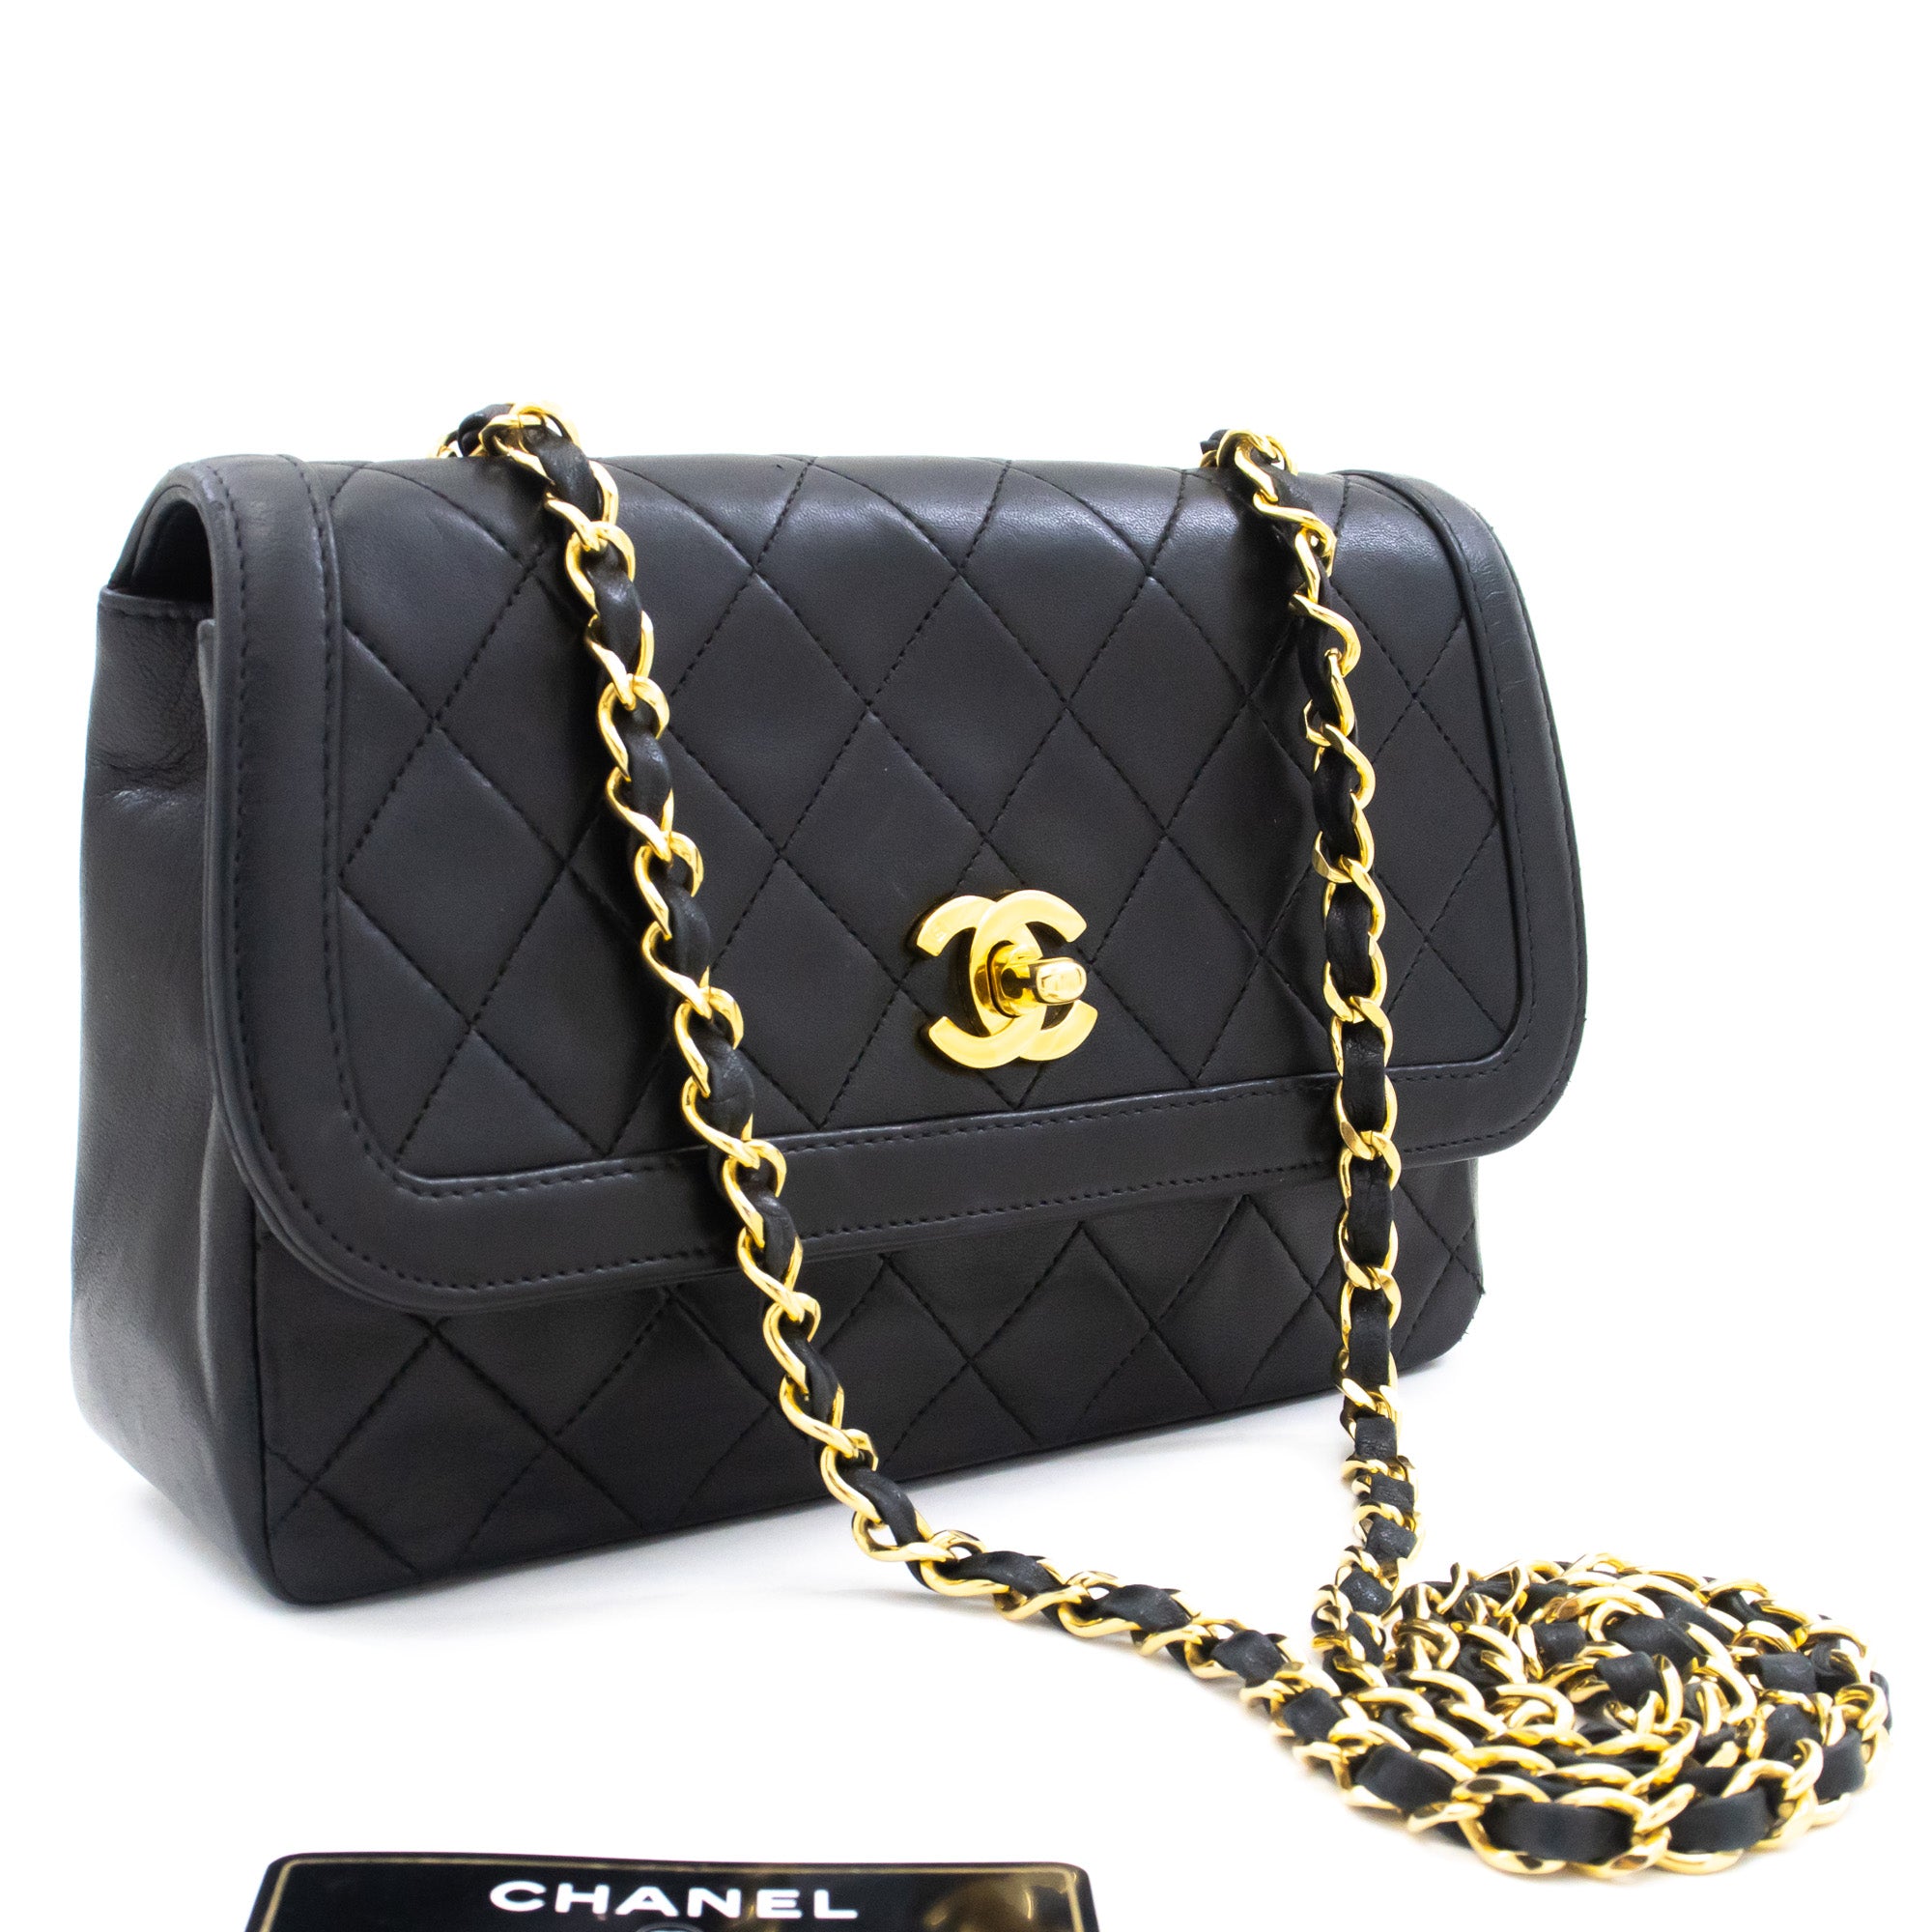 Chanel Vintage Classic Small Chain Shoulder Bag